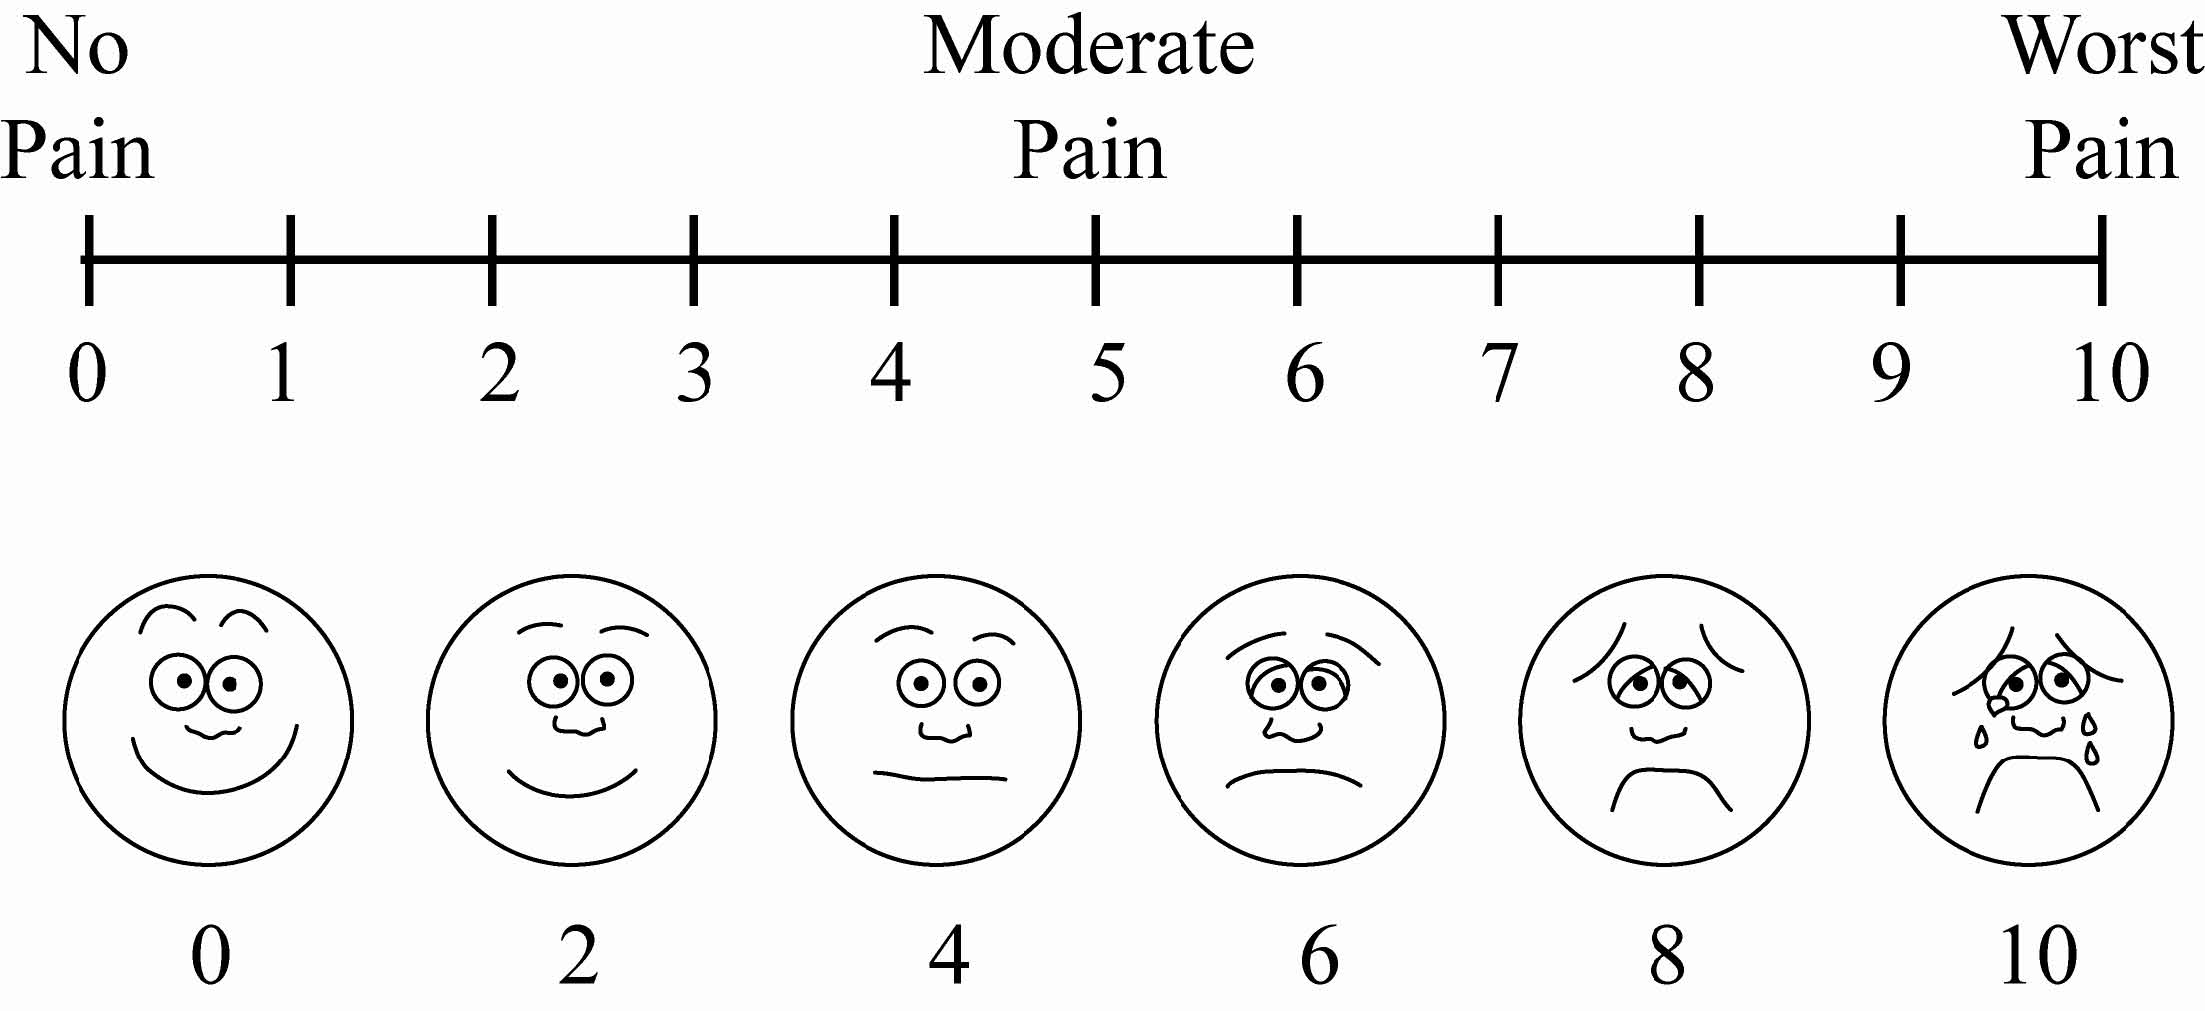 image of pain scale from 1 to 10